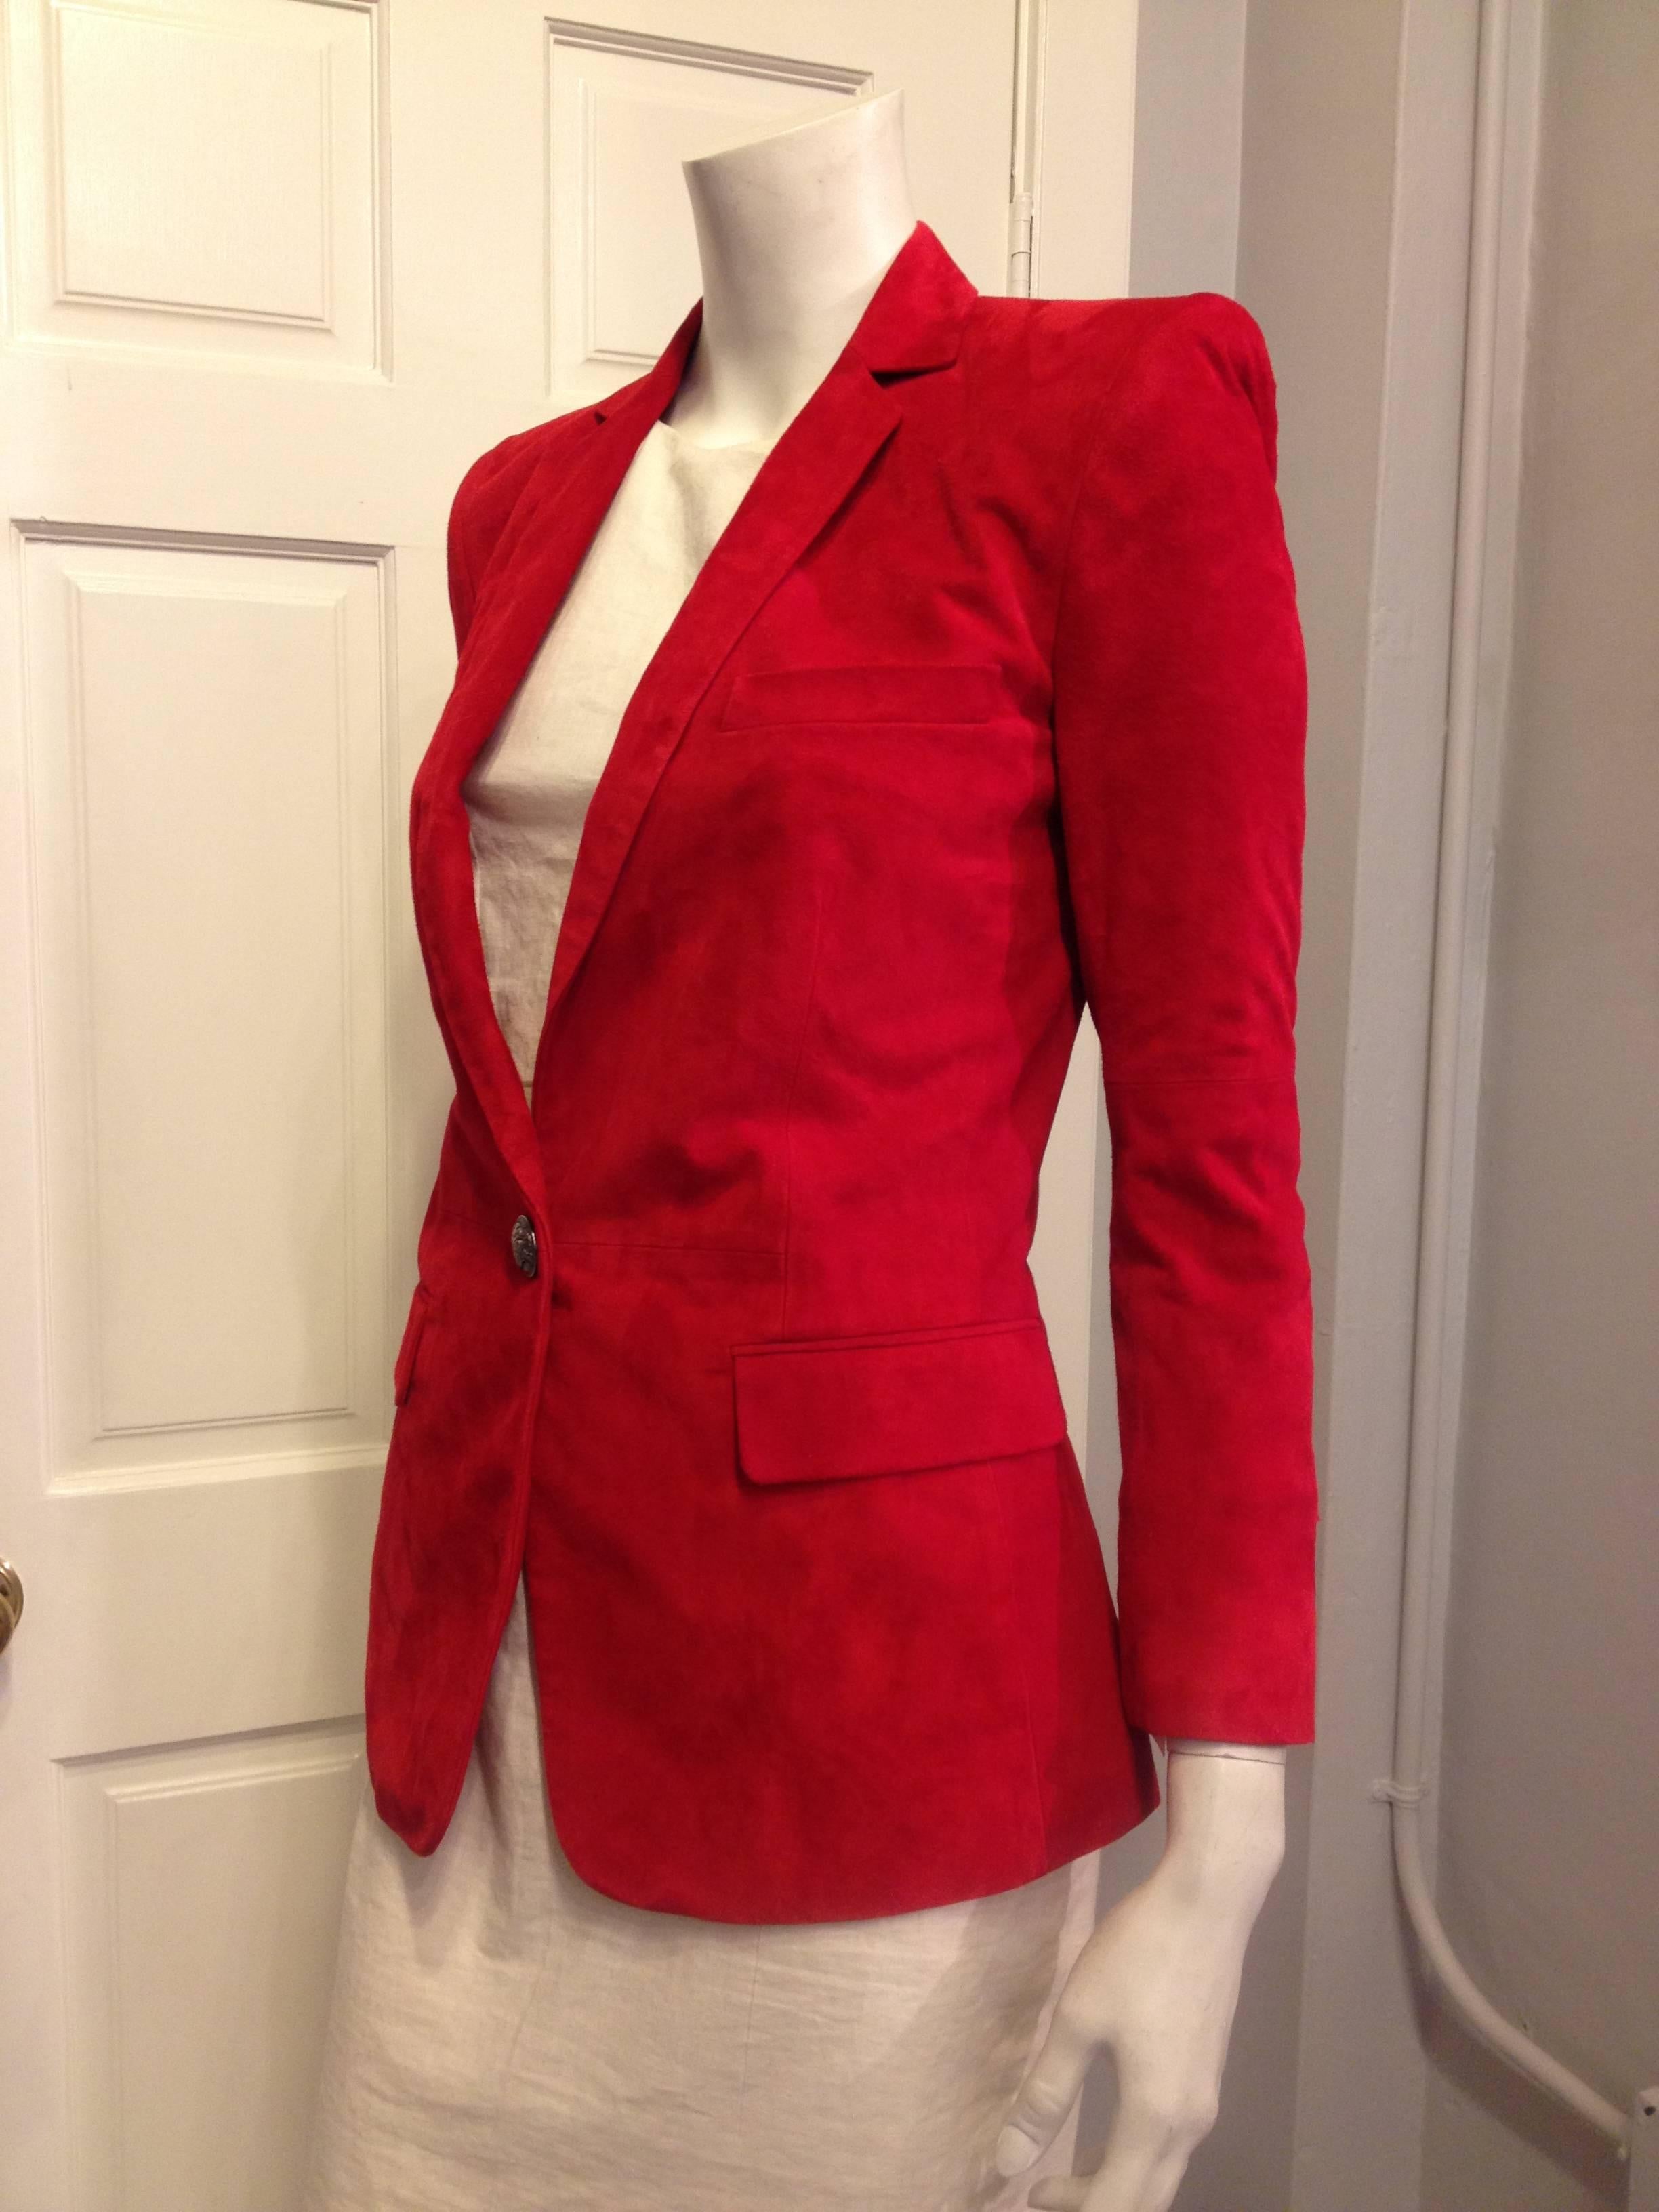 How iconic! A red suede blazer cut as sharply as this one is instantly so rock & roll, especially when it's made by Balmain. The shoulders are super-sculpted in the signature Balmain way, and the sleeves are slightly cropped for a shrunken fit. The